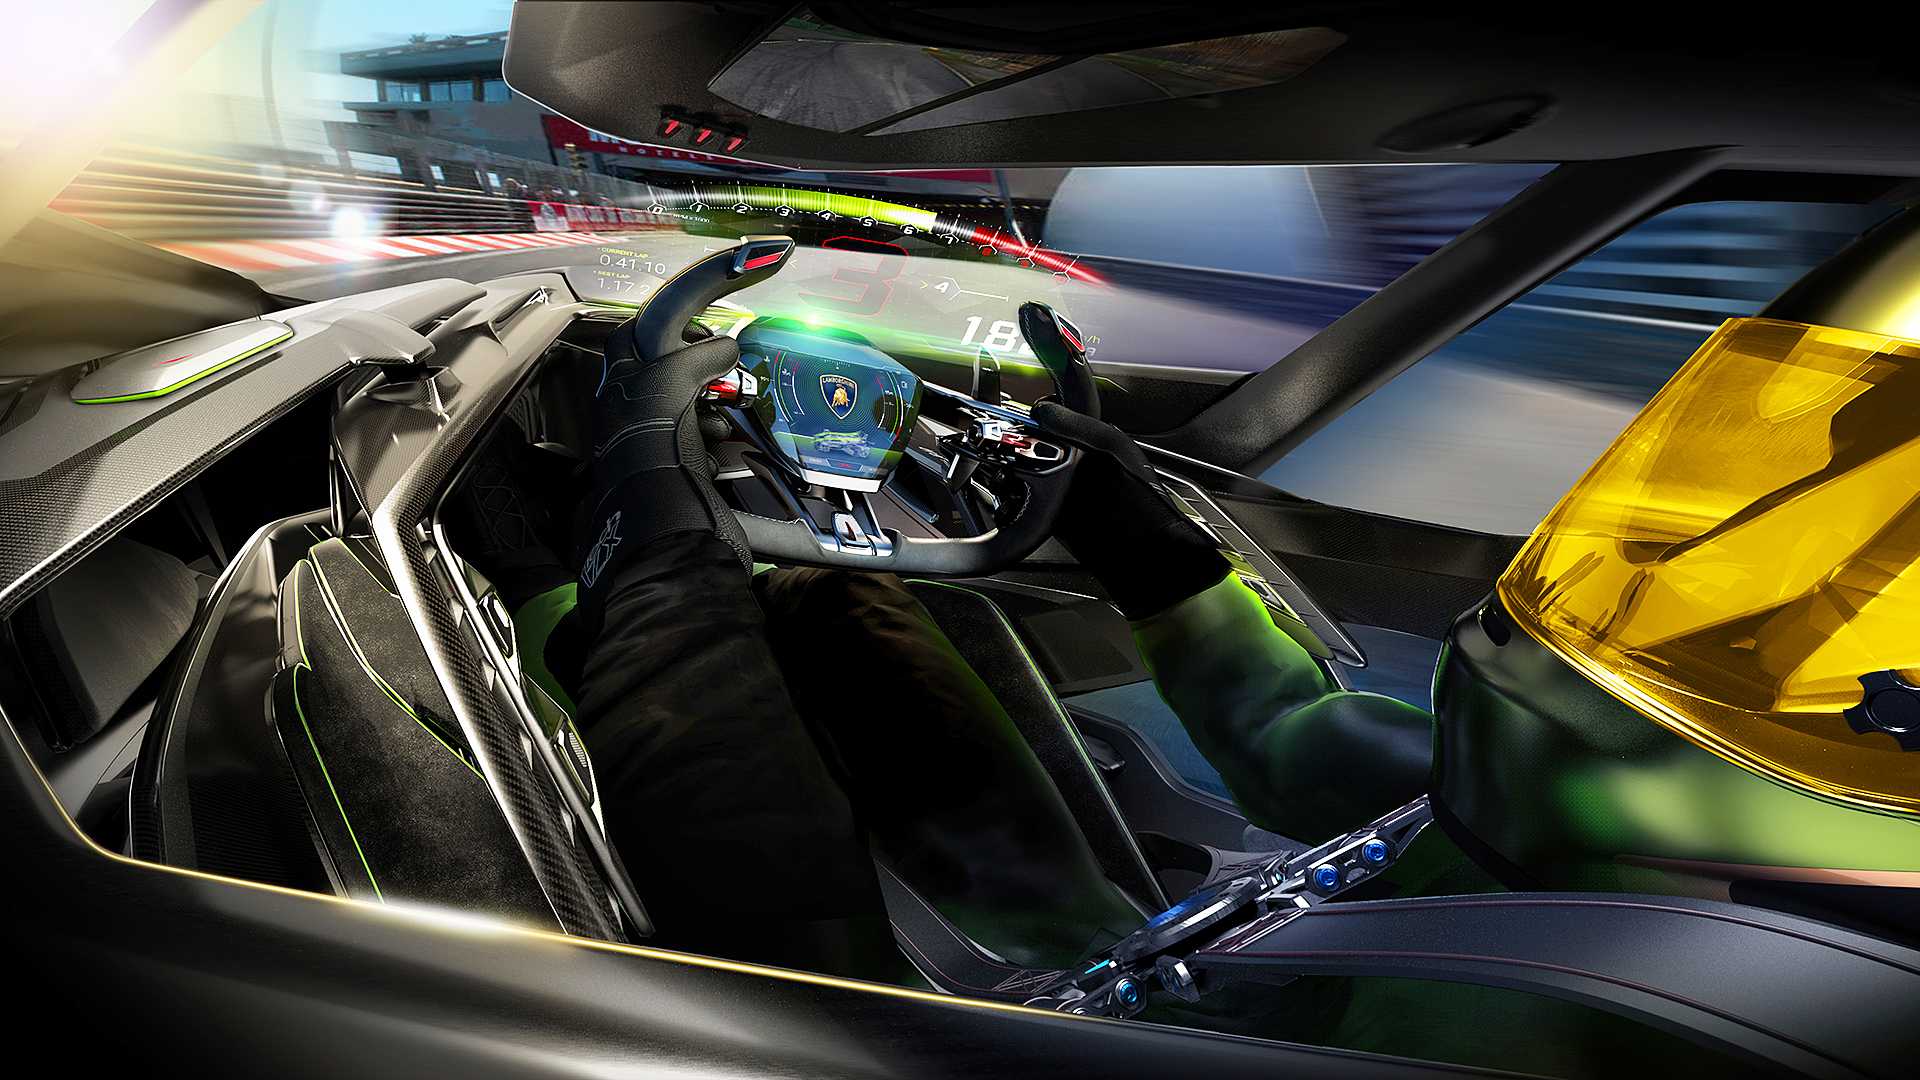 Lambo V12 Vision Gran Turismo Unveiled As 'The Best Virtual